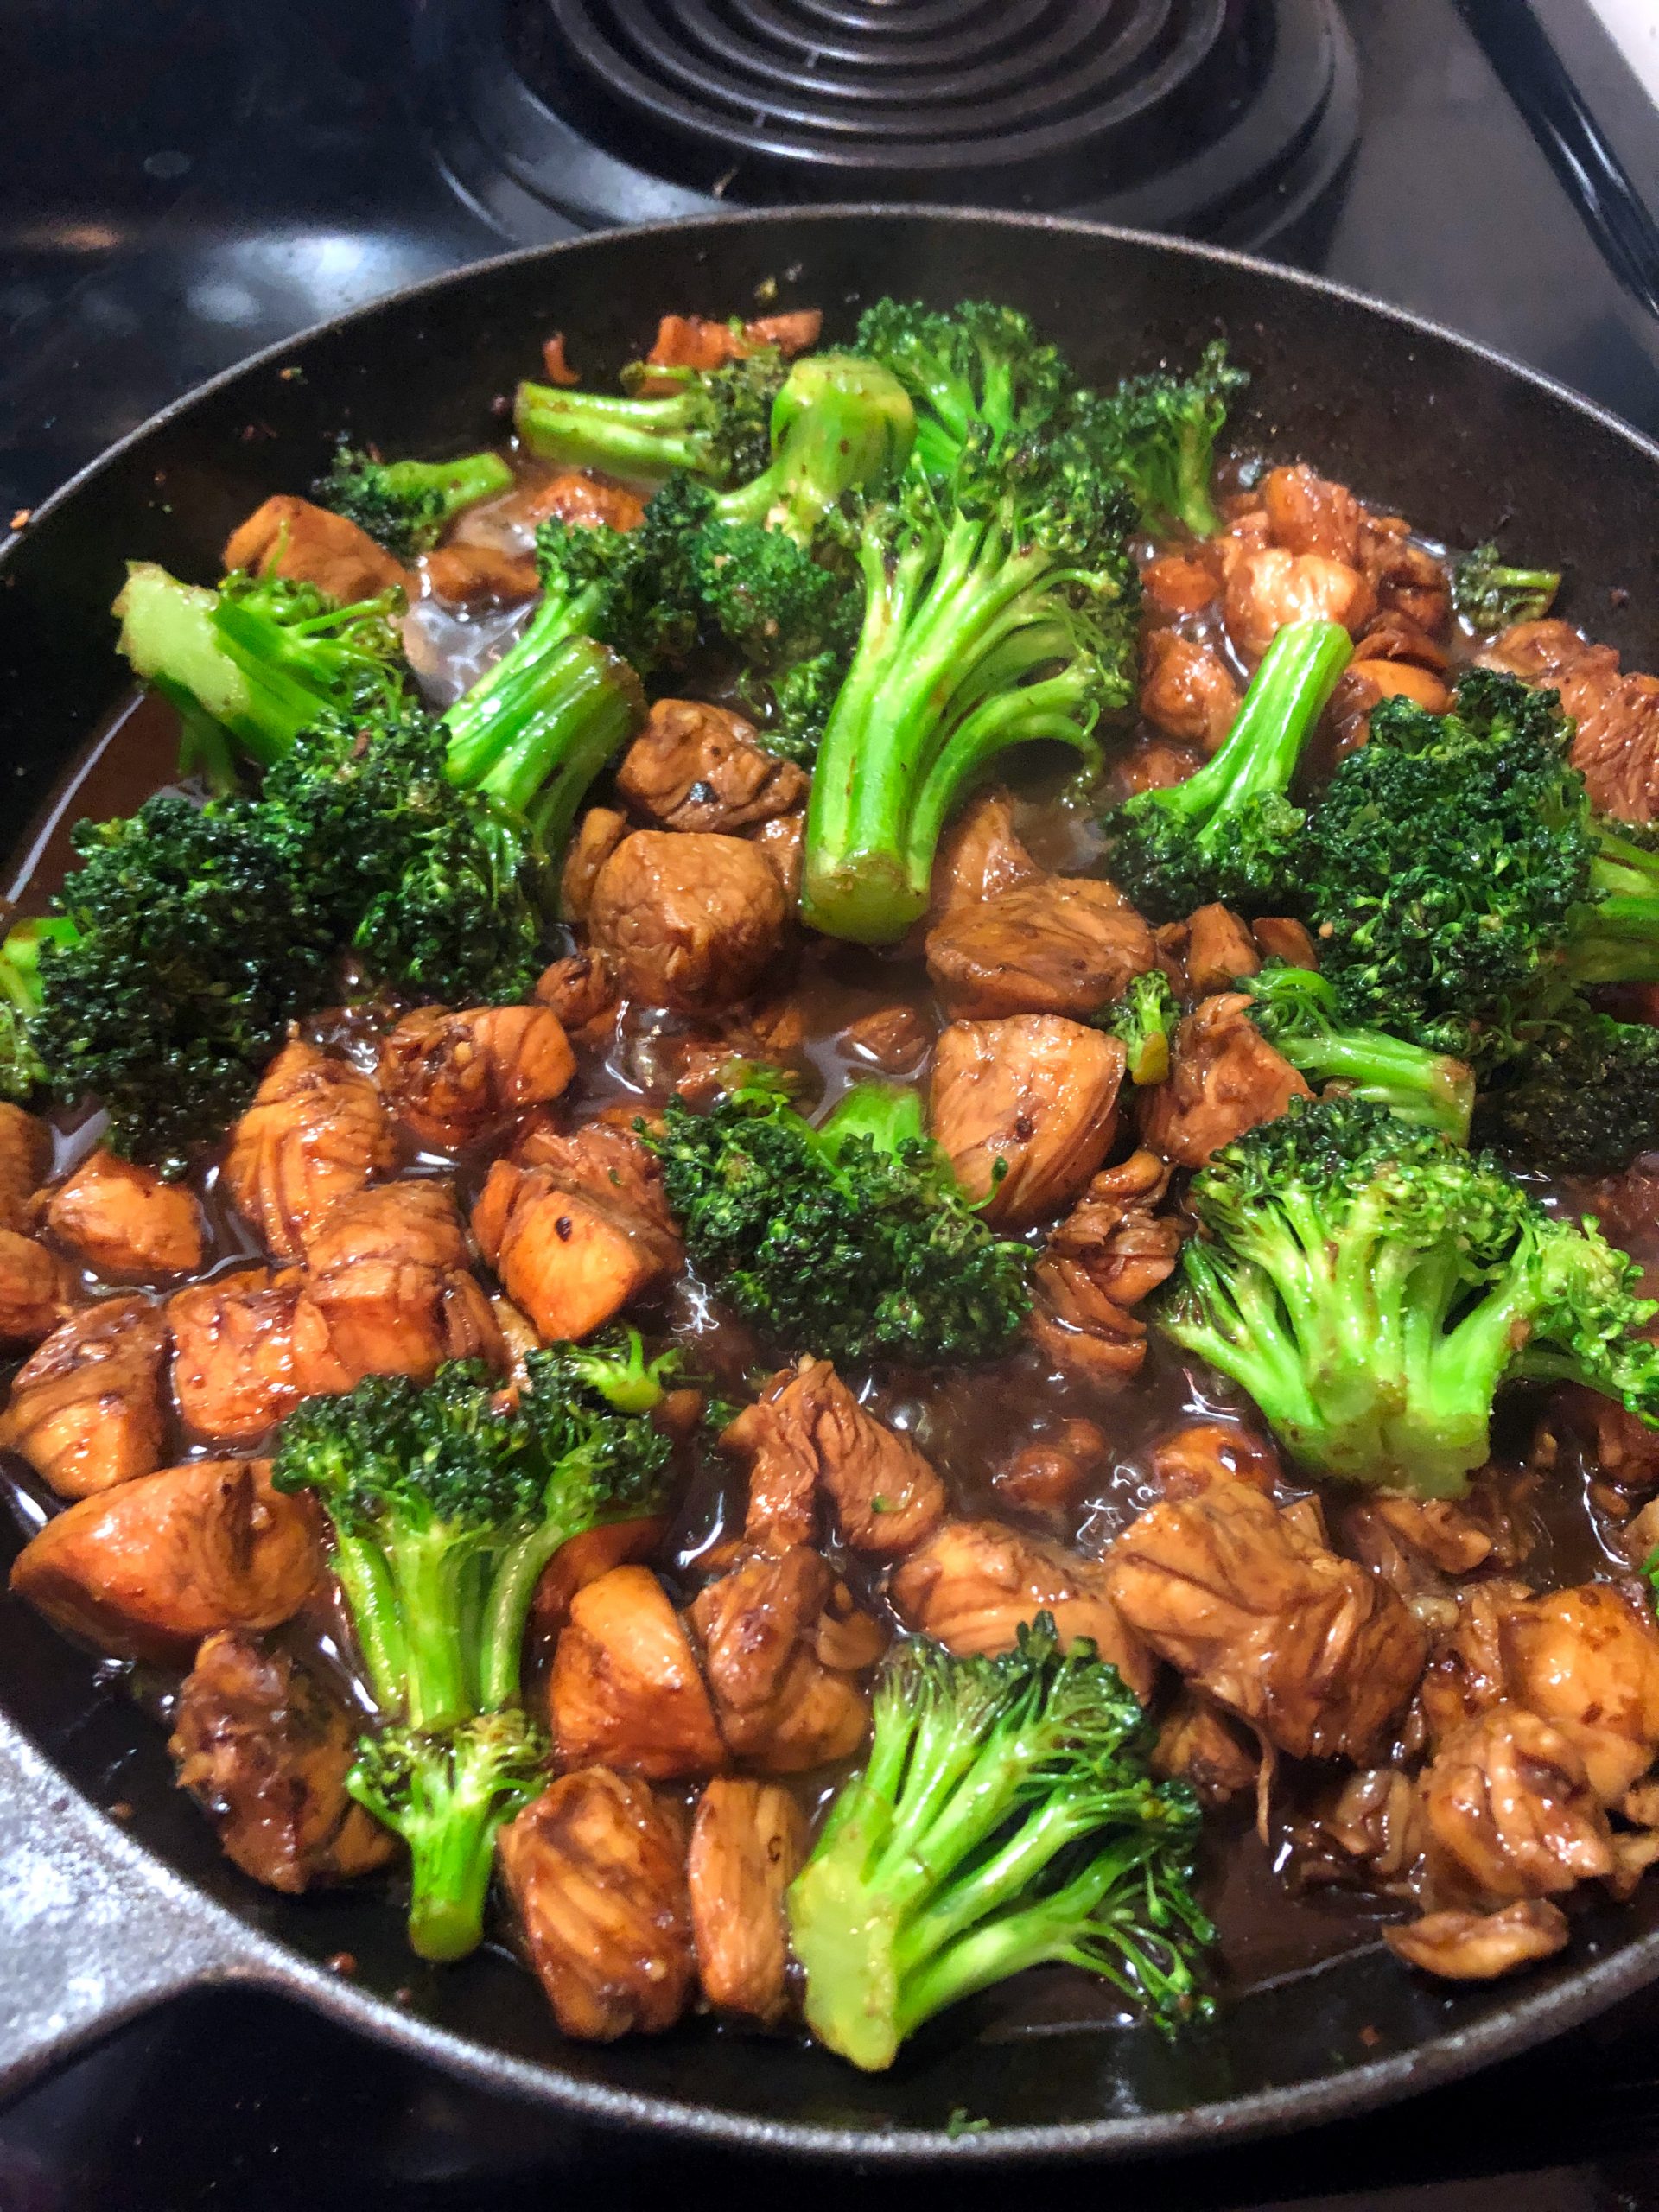 Chicken with Broccoli (Chinese Recipe) • Oh Snap! Let's Eat!